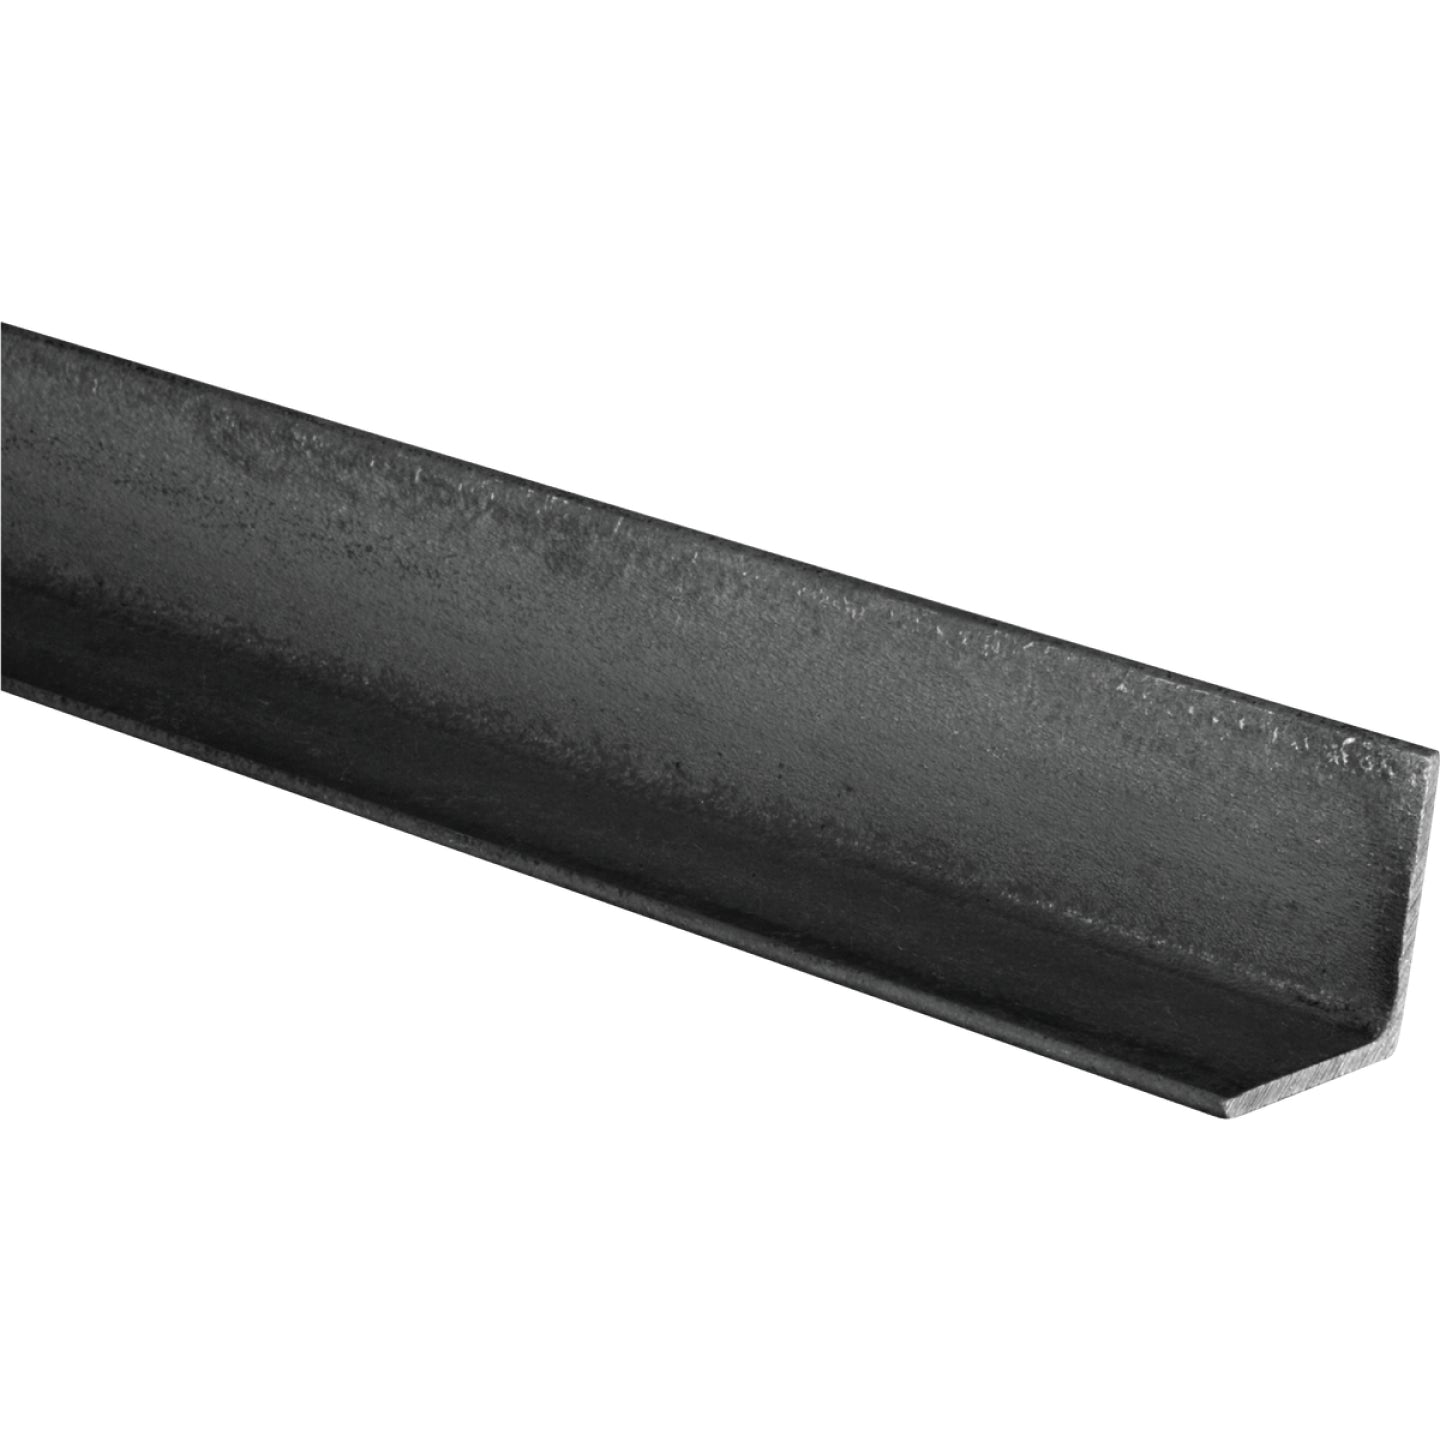 Hillman, HILLMAN Steelworks 1-1/4 In. x 6 Ft., 1/8 In. Construct-it Weldable Solid Angle